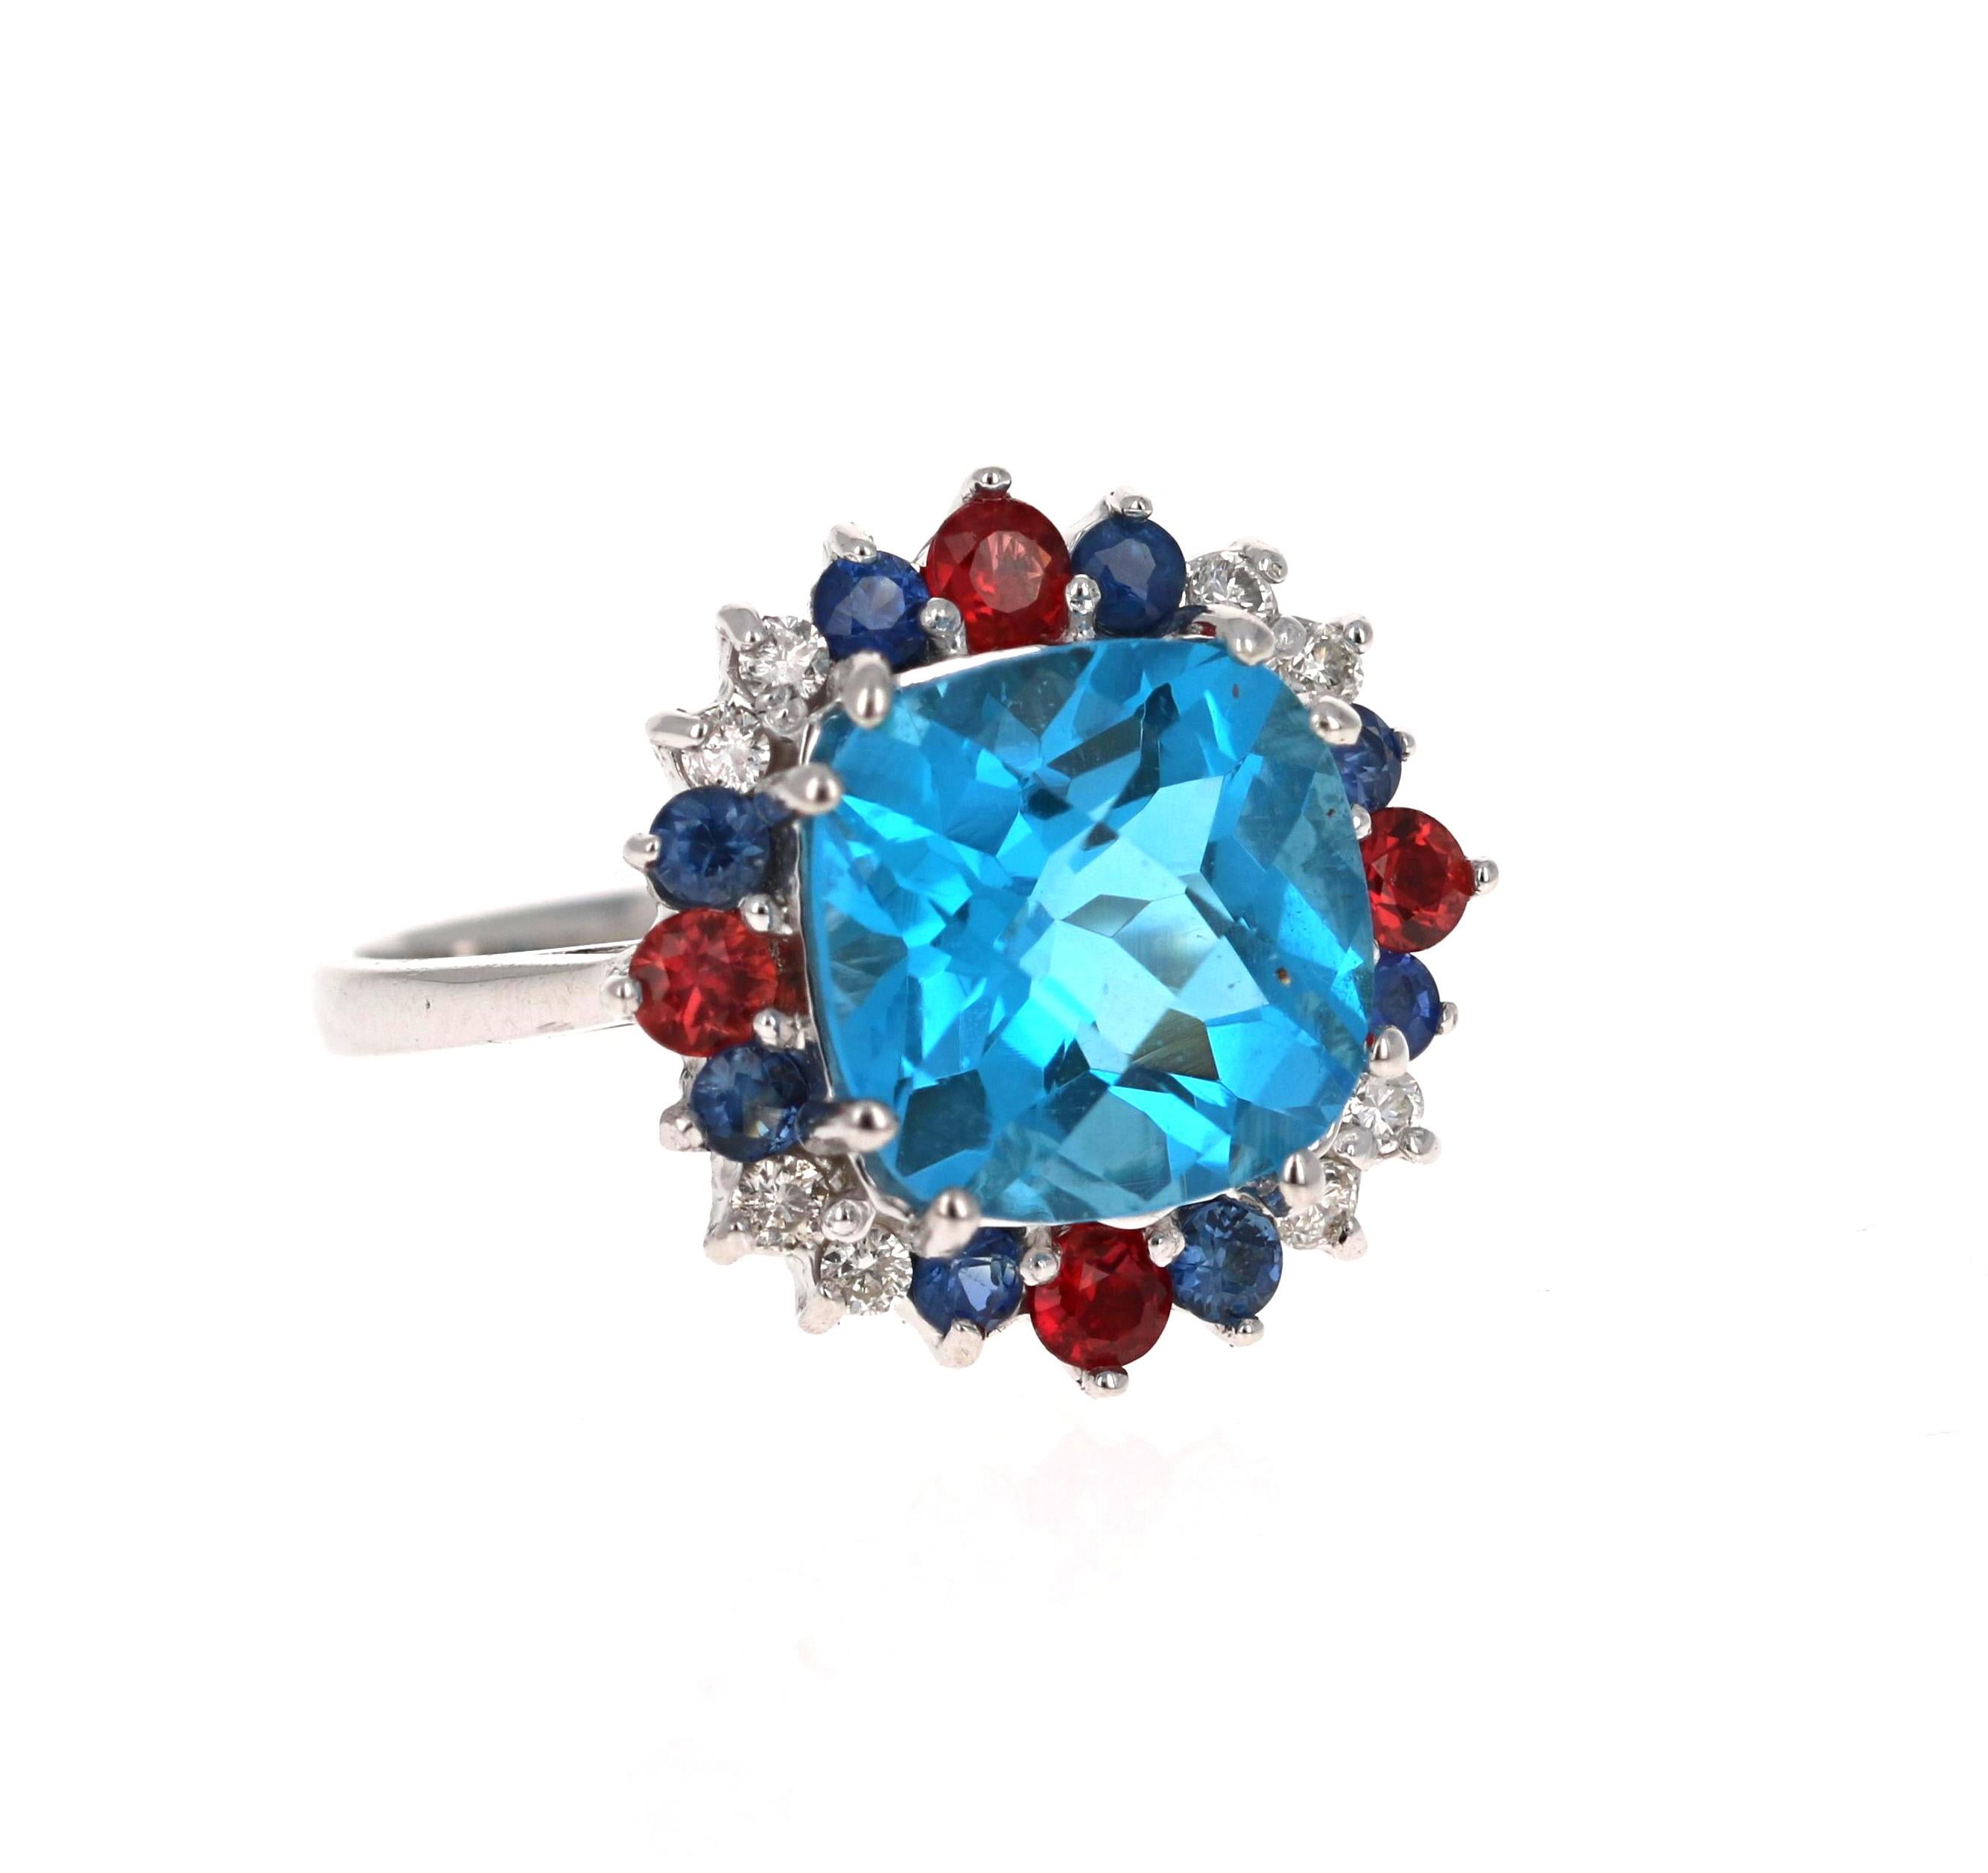 5.39 Carat Cushion Cut Blue Topaz Sapphire Diamond 14K Yellow Gold Cocktail Ring

This beautiful Cushion Cut Blue Topaz, Sapphire and Diamond Ring has a stunning 4.56 Carat Blue Topaz and its surrounded by 12 Red and Blue Sapphires that weigh 0.83